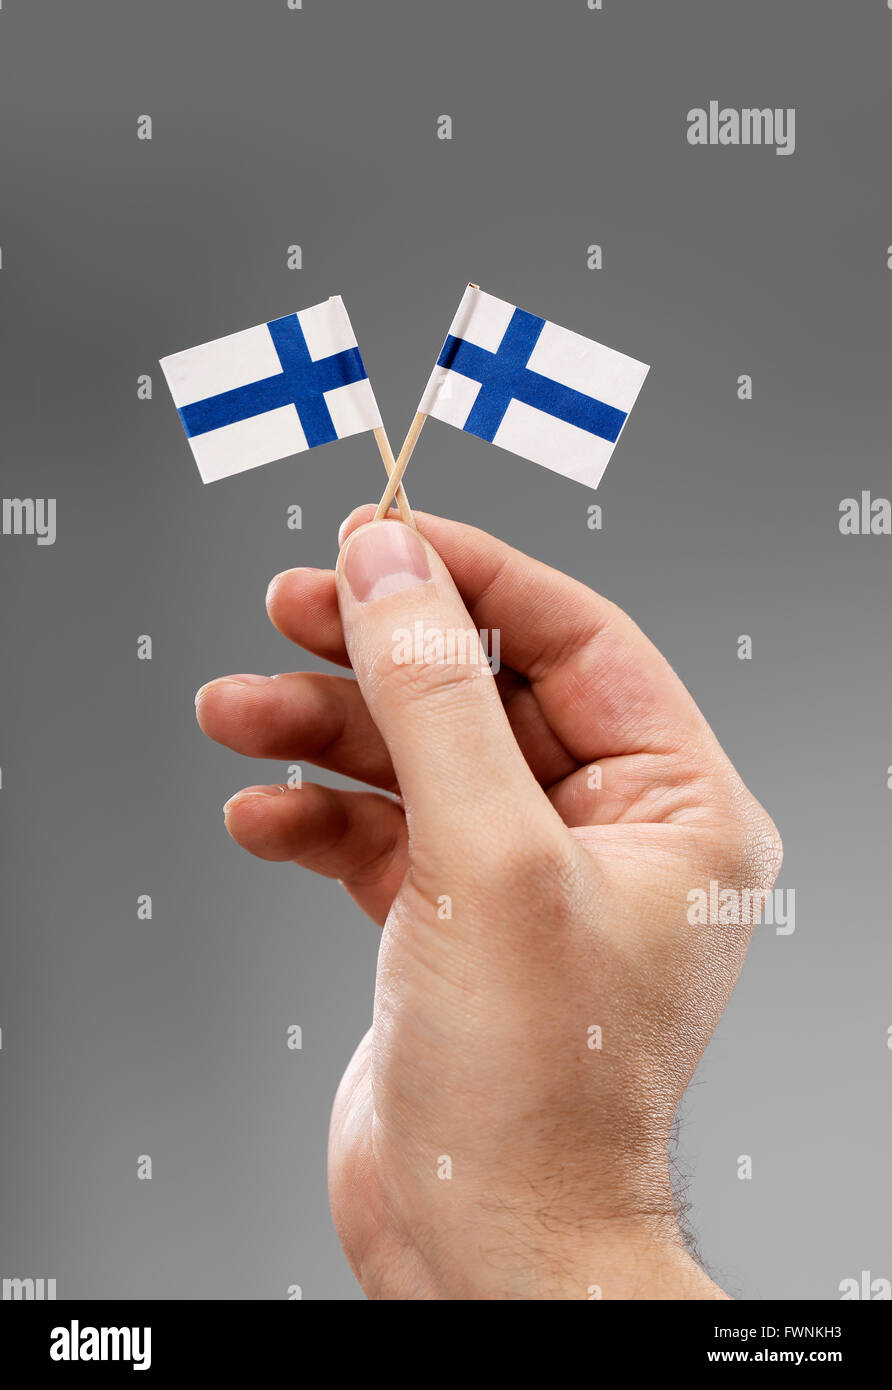 Man holding two small flags of Finland in his hand. Stock Photo